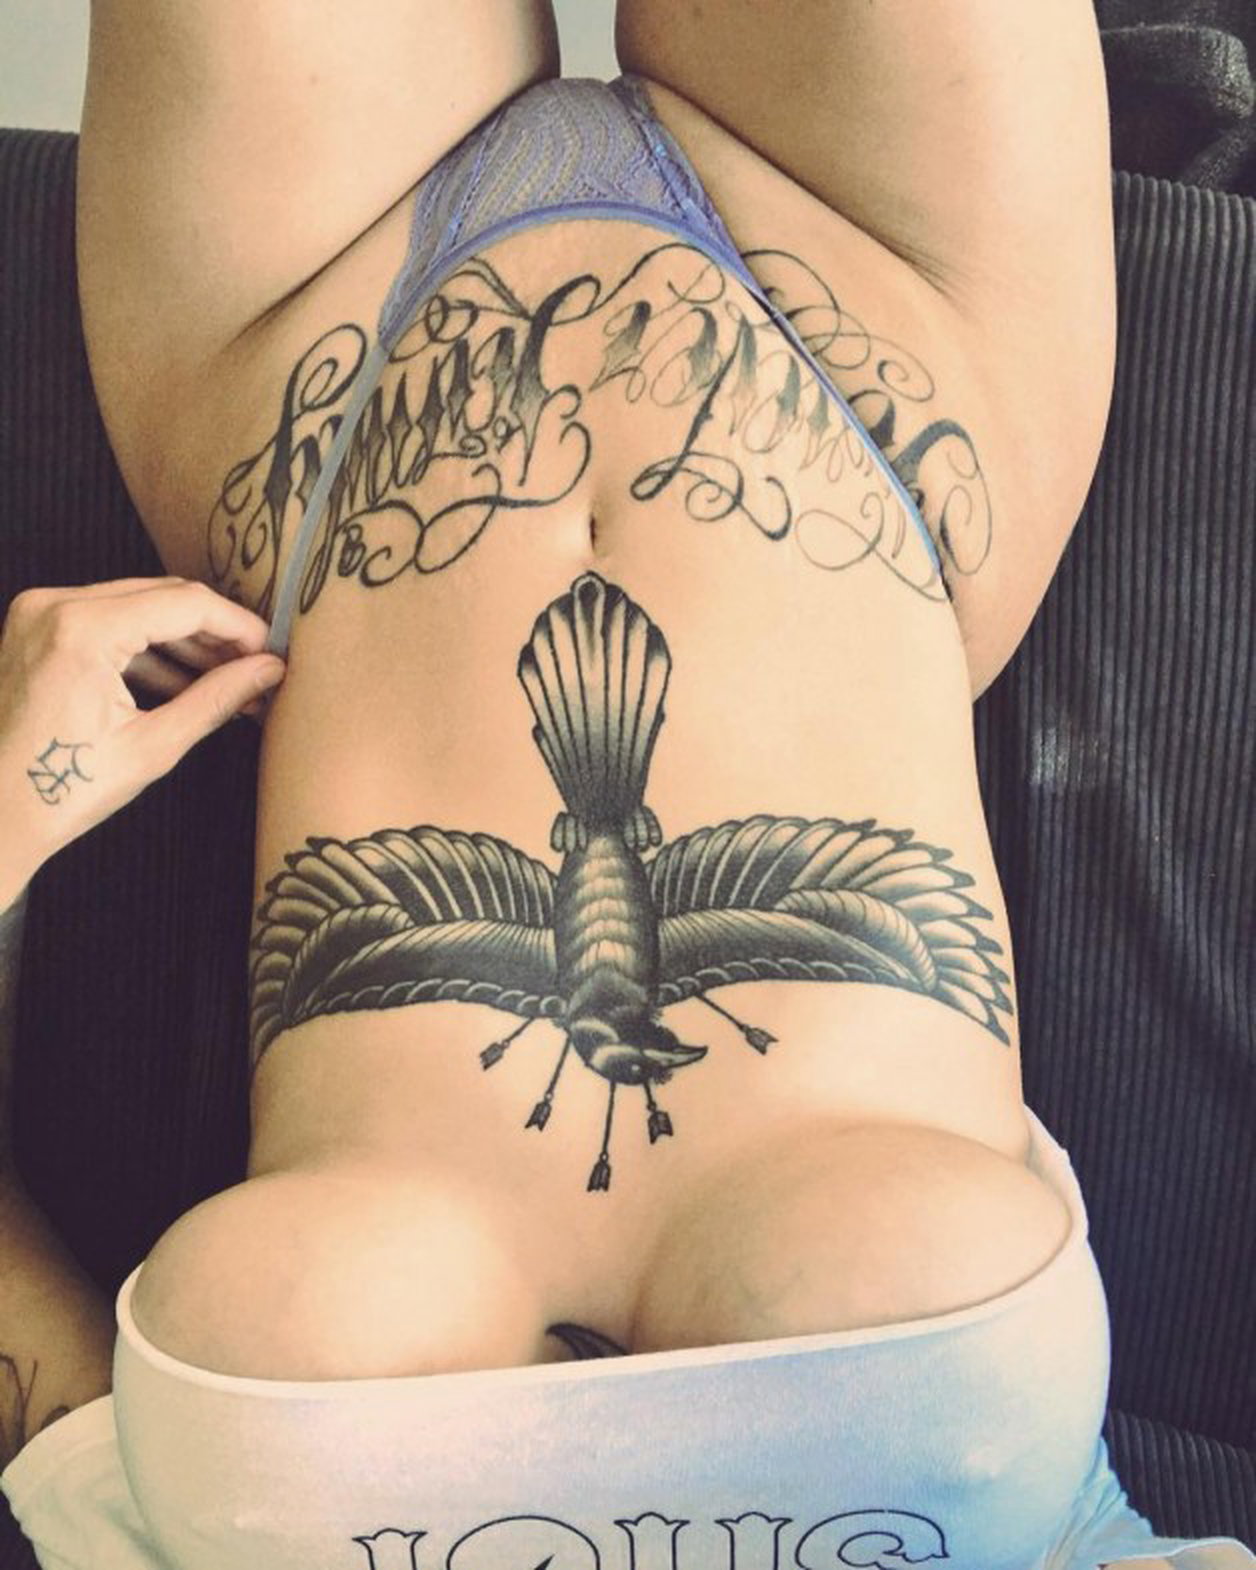 Link by Devynsdogg with the username @Devynsdogg,  March 7, 2019 at 3:30 PM. The post is about the topic Tattoo and the text says 'Her tummy tat says “Family Forever”. It won’t take long to get her in the family way. #fetish #sexyfemales #faketits #awesomeboobs #sexylingerire
/?utm_source=ig_web_copy_link'